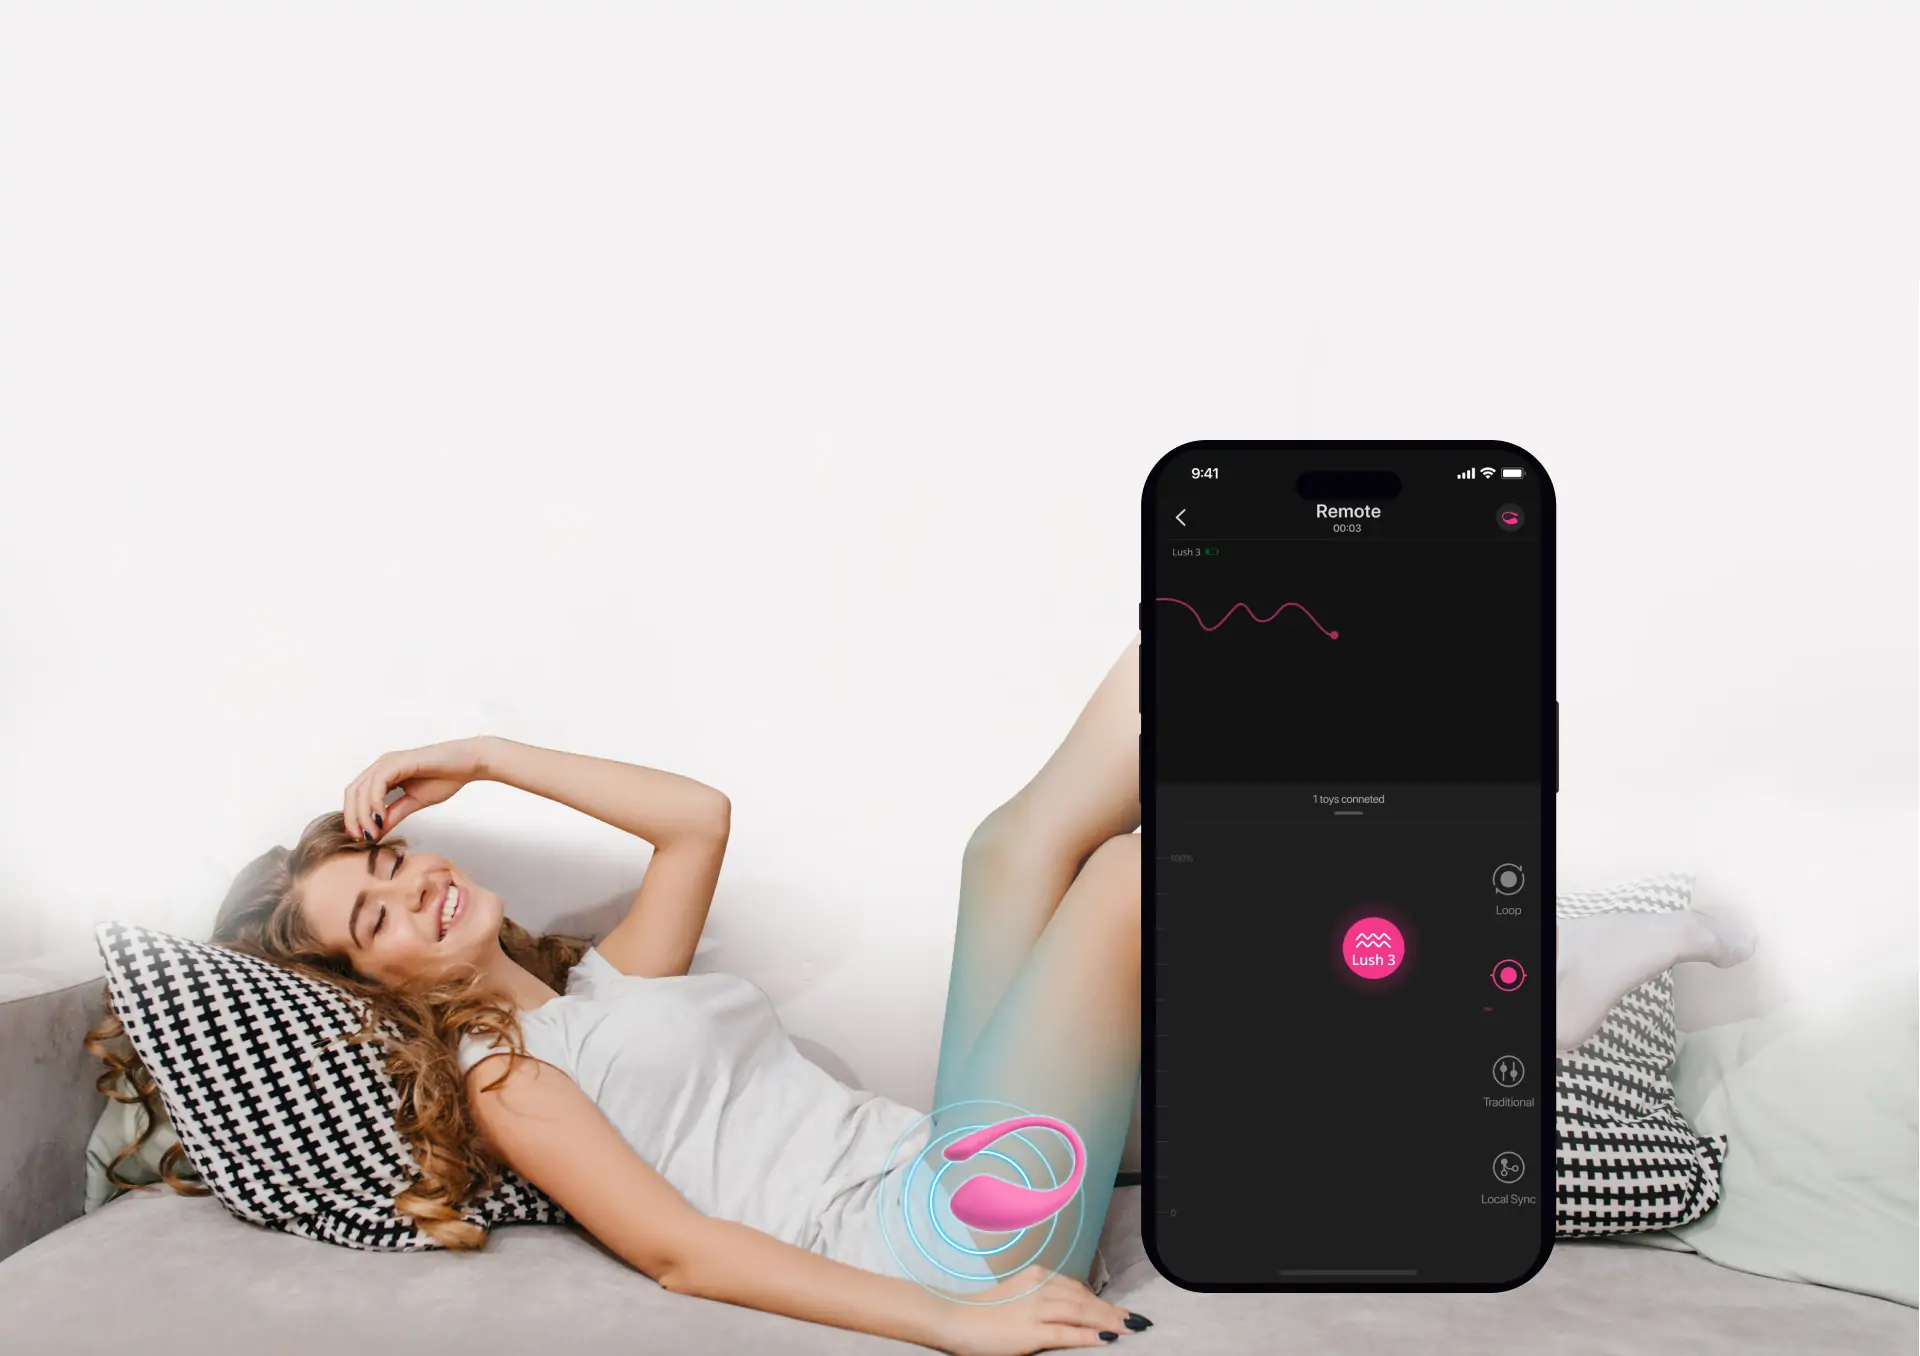 Lush 3 is a wearable remote control vibrator.